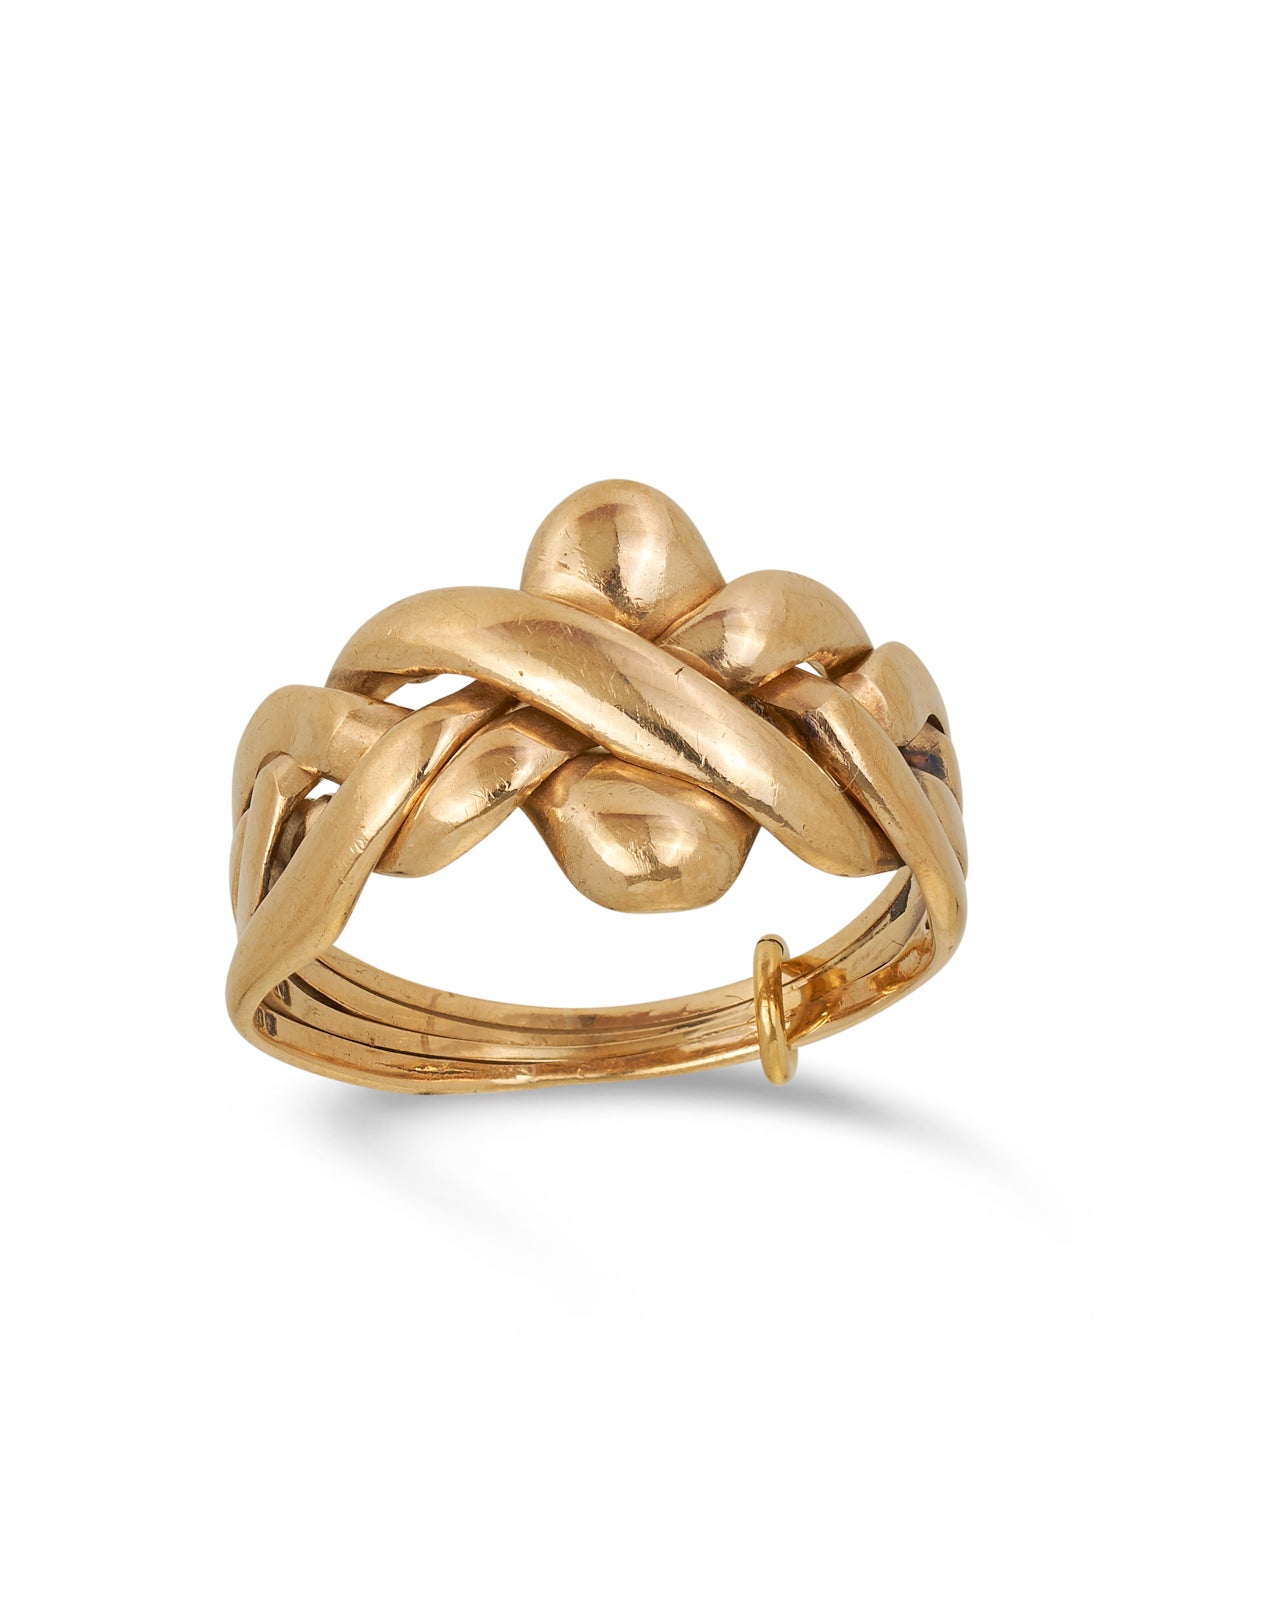 Vintage gold puzzle ring, London, 1976